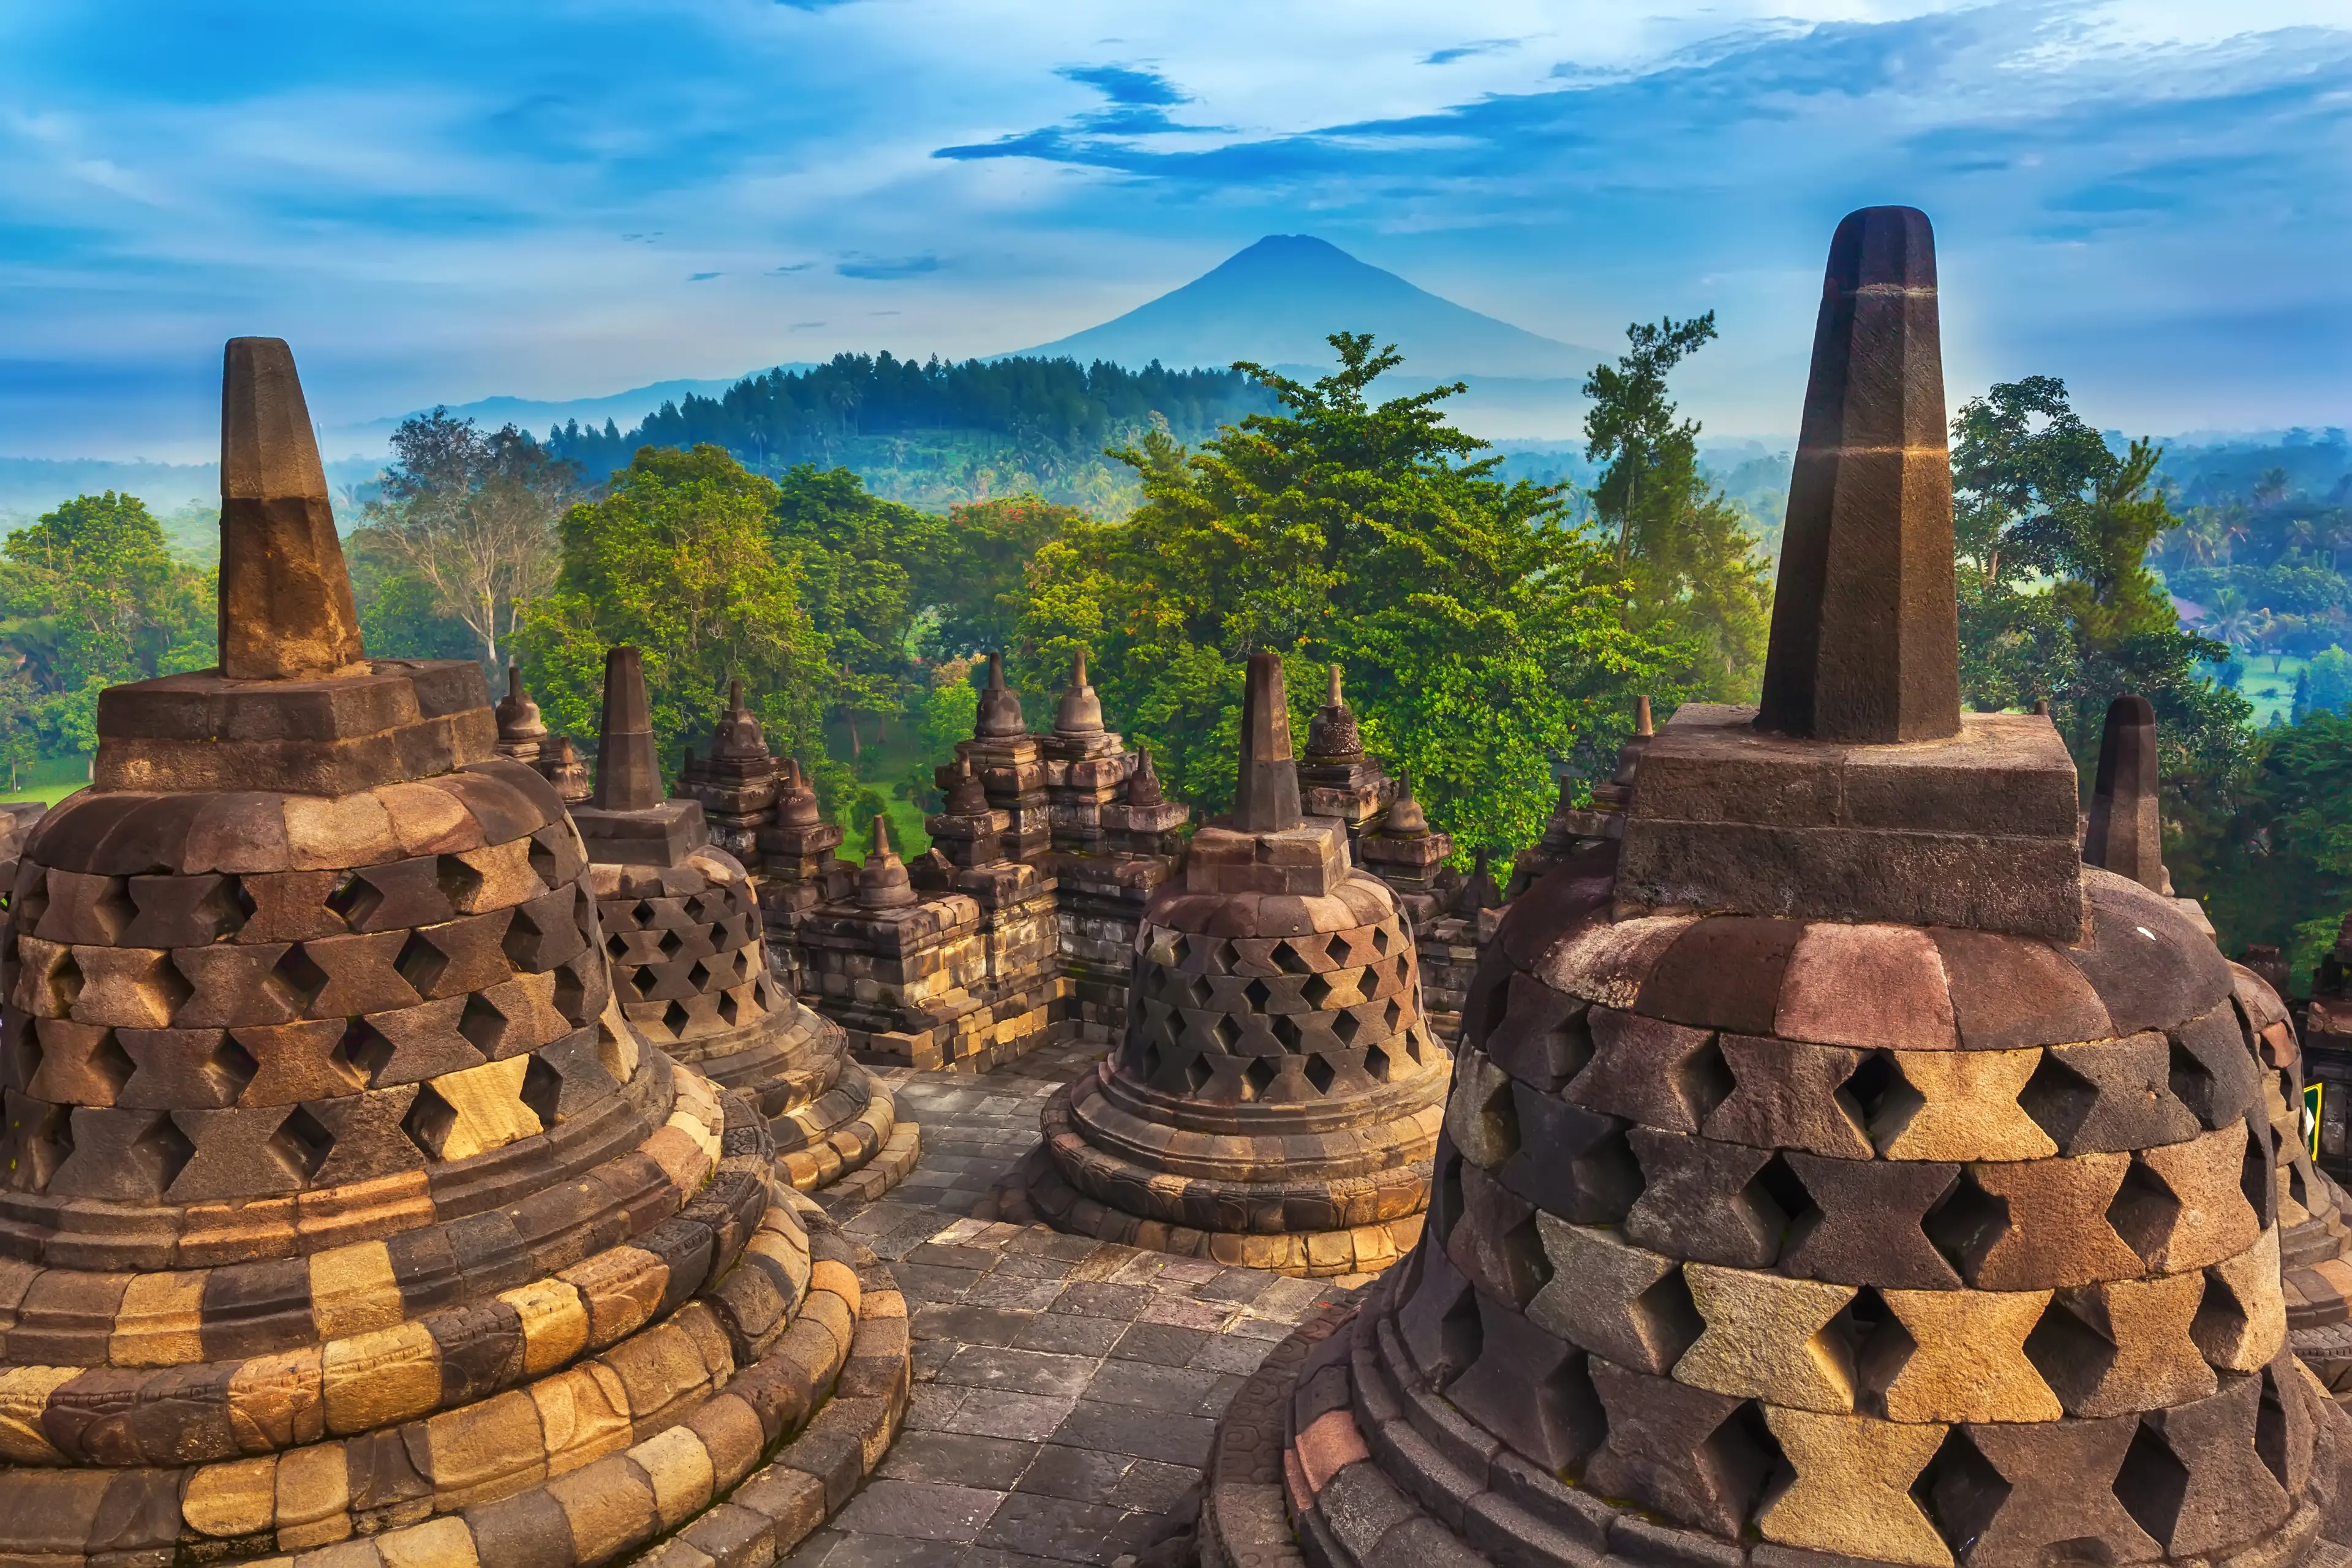 Candi Borobudur in the background of rainforest and Sumbing Mountain.